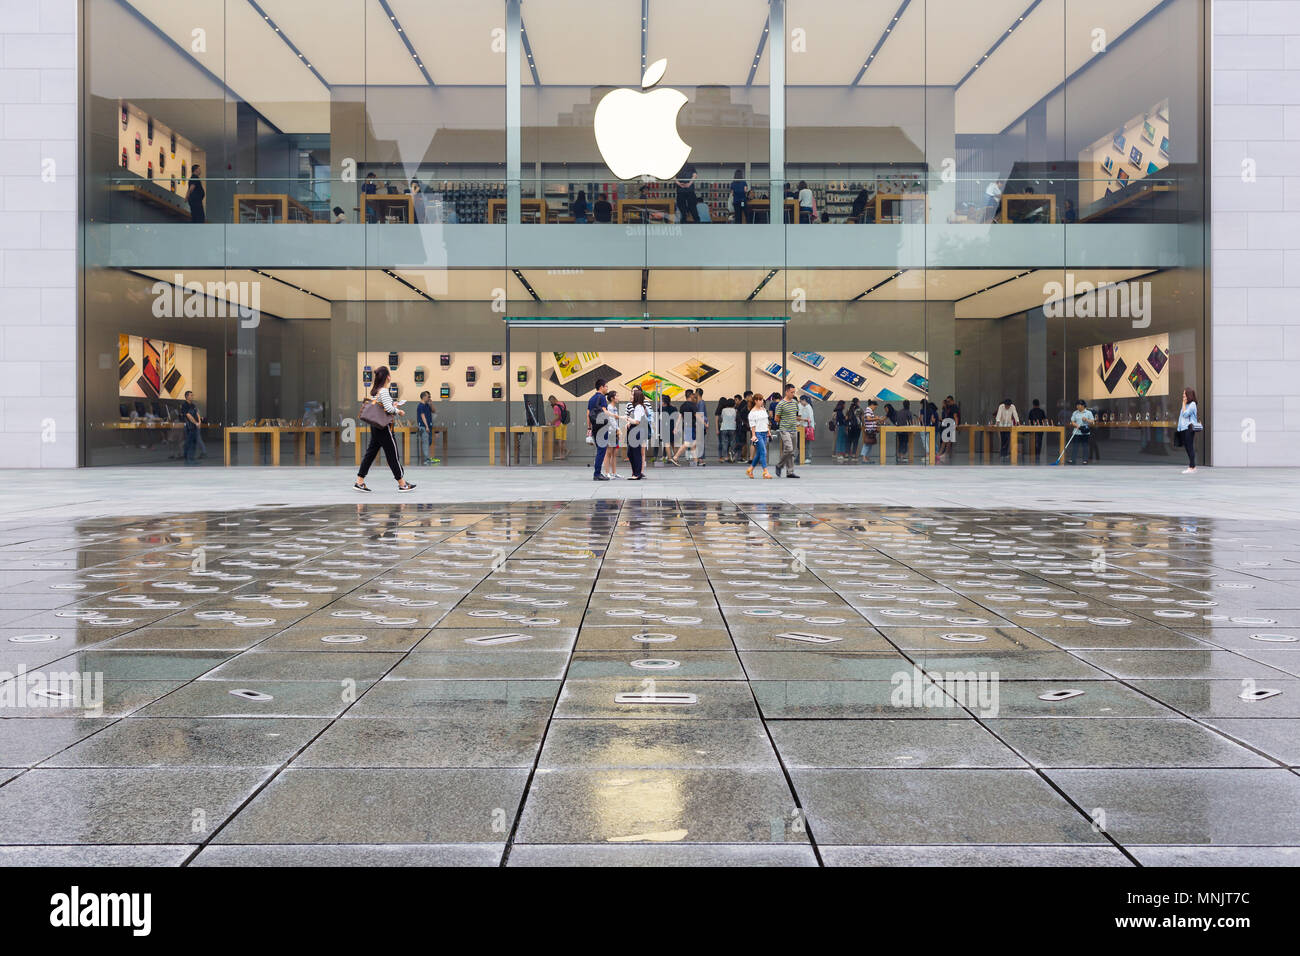 CHENGDU , CHINA - SEPTEMBER 13, 2016: Apple Store in Chengdu , China , with pedestrians passing by outside the store during a rainy day . Stock Photo